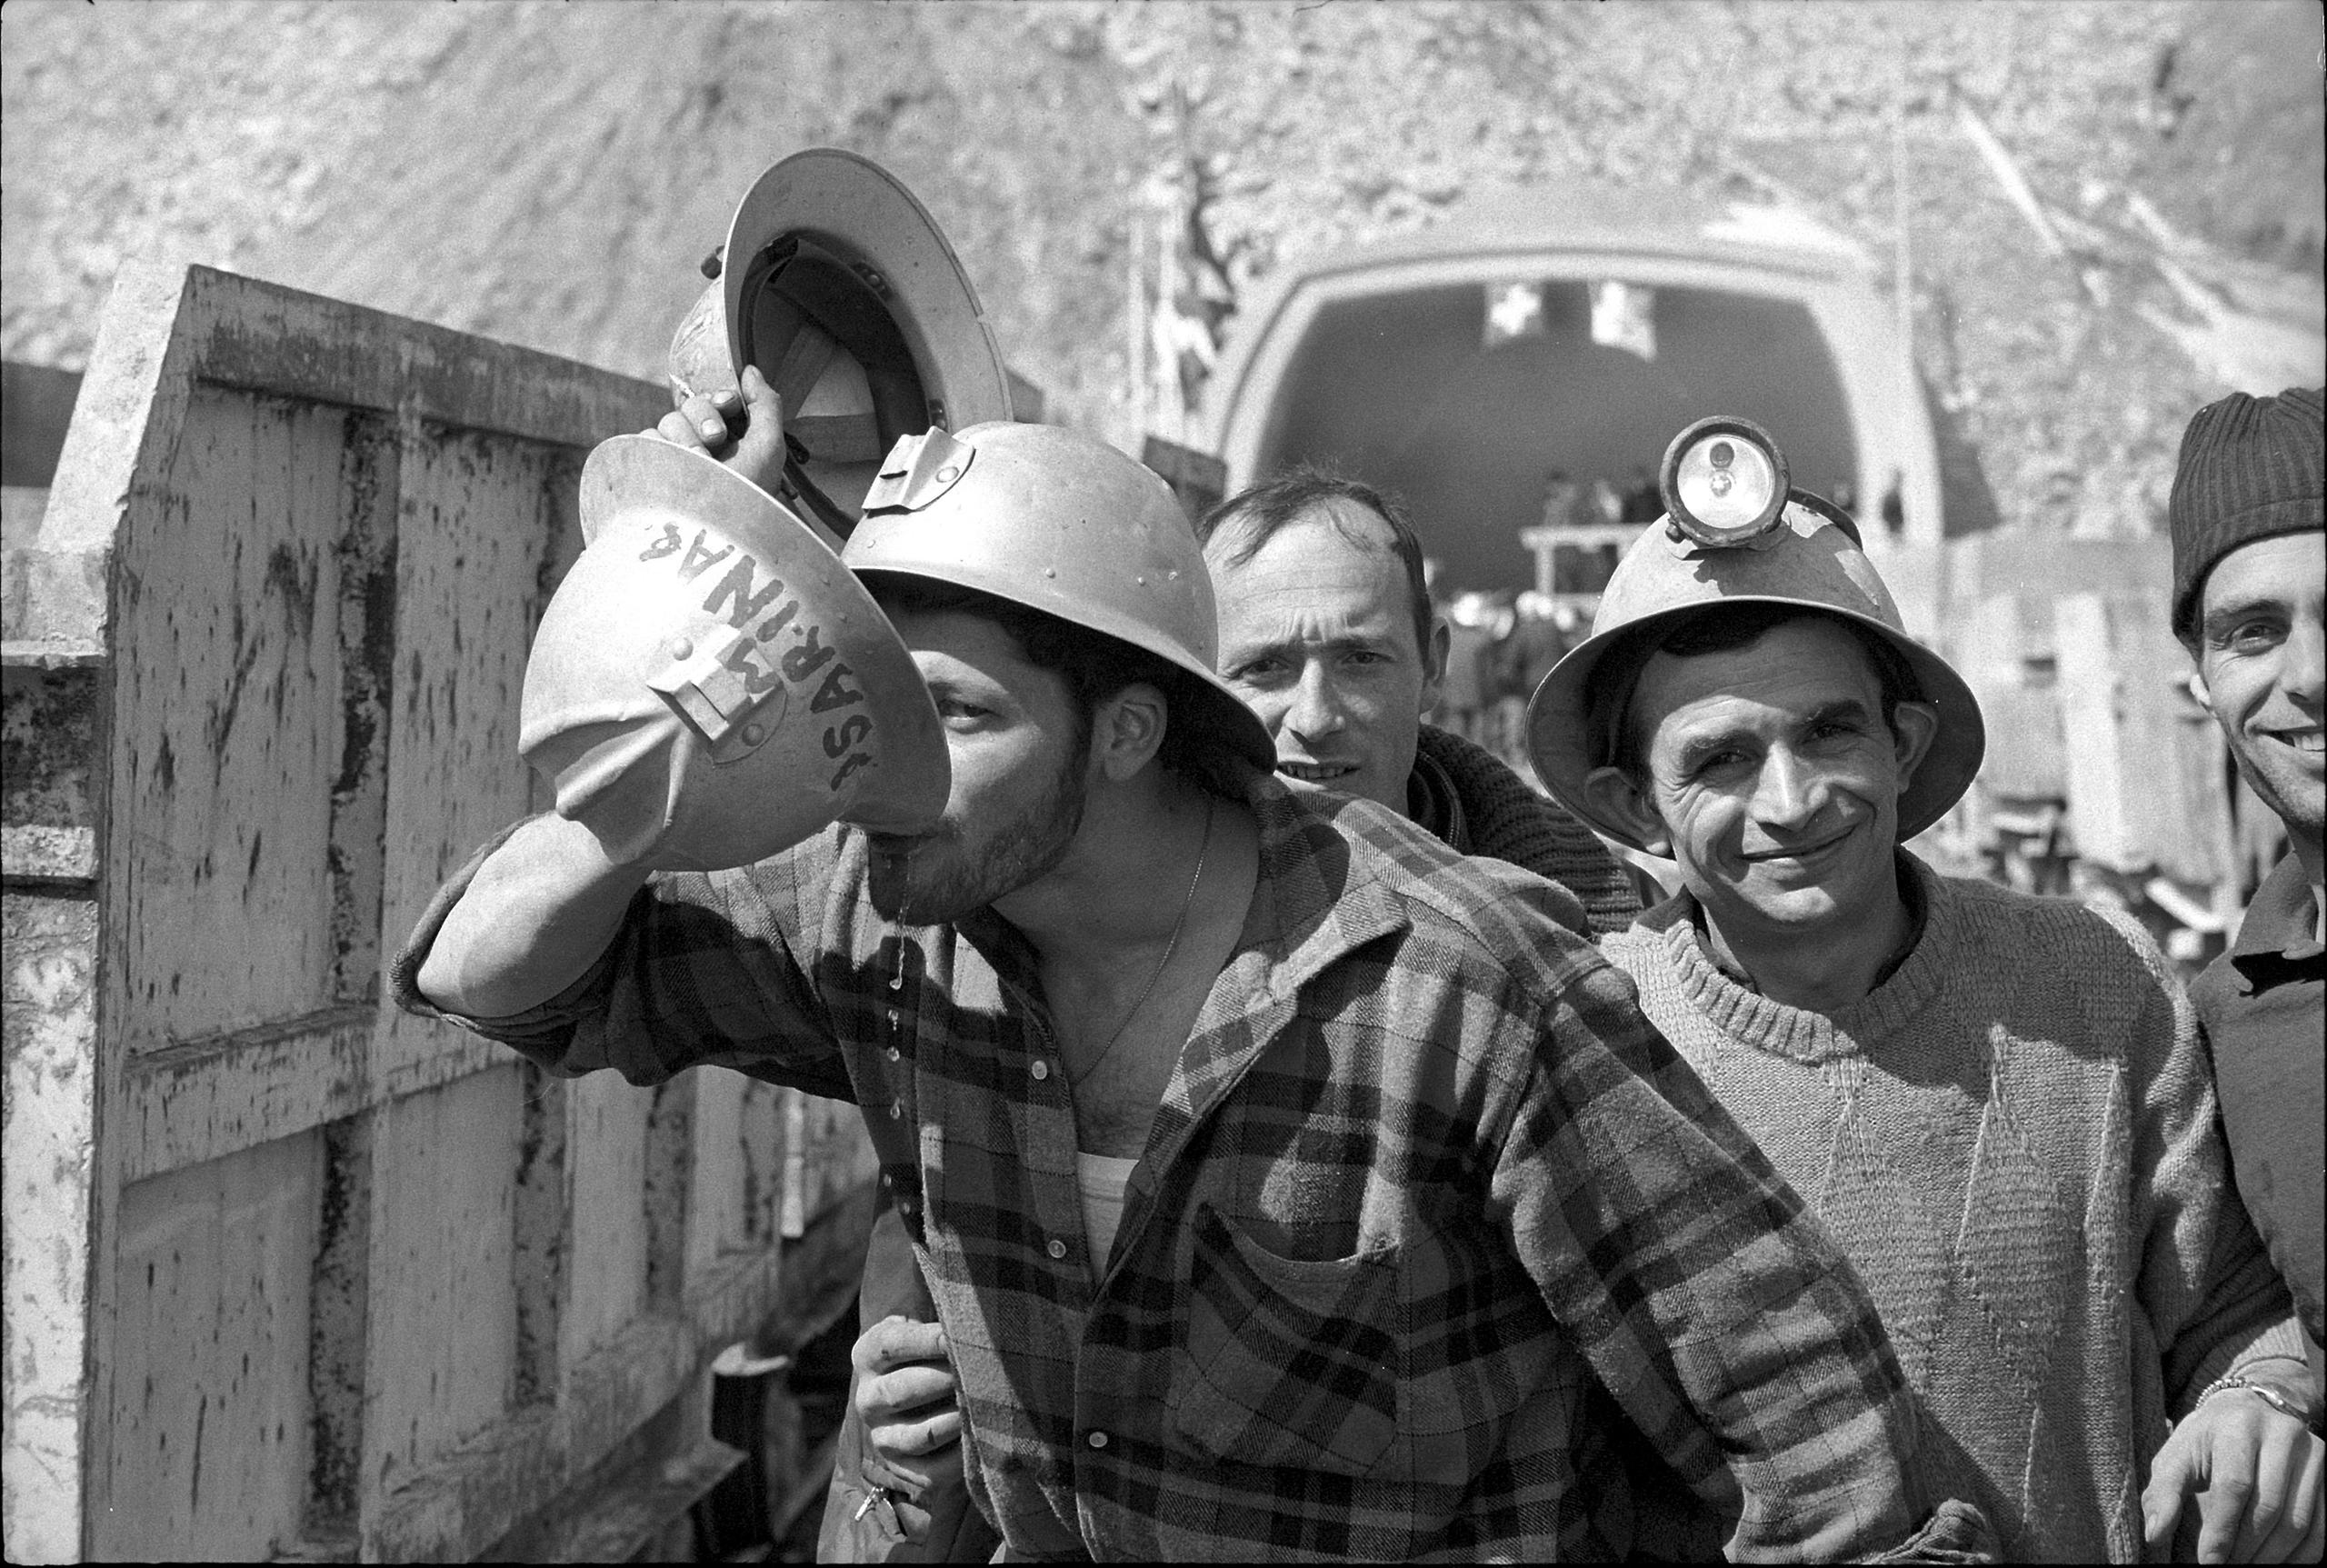 Miners celebrate the breakthrough at the southernportal of the n Bernardino Tunnel.